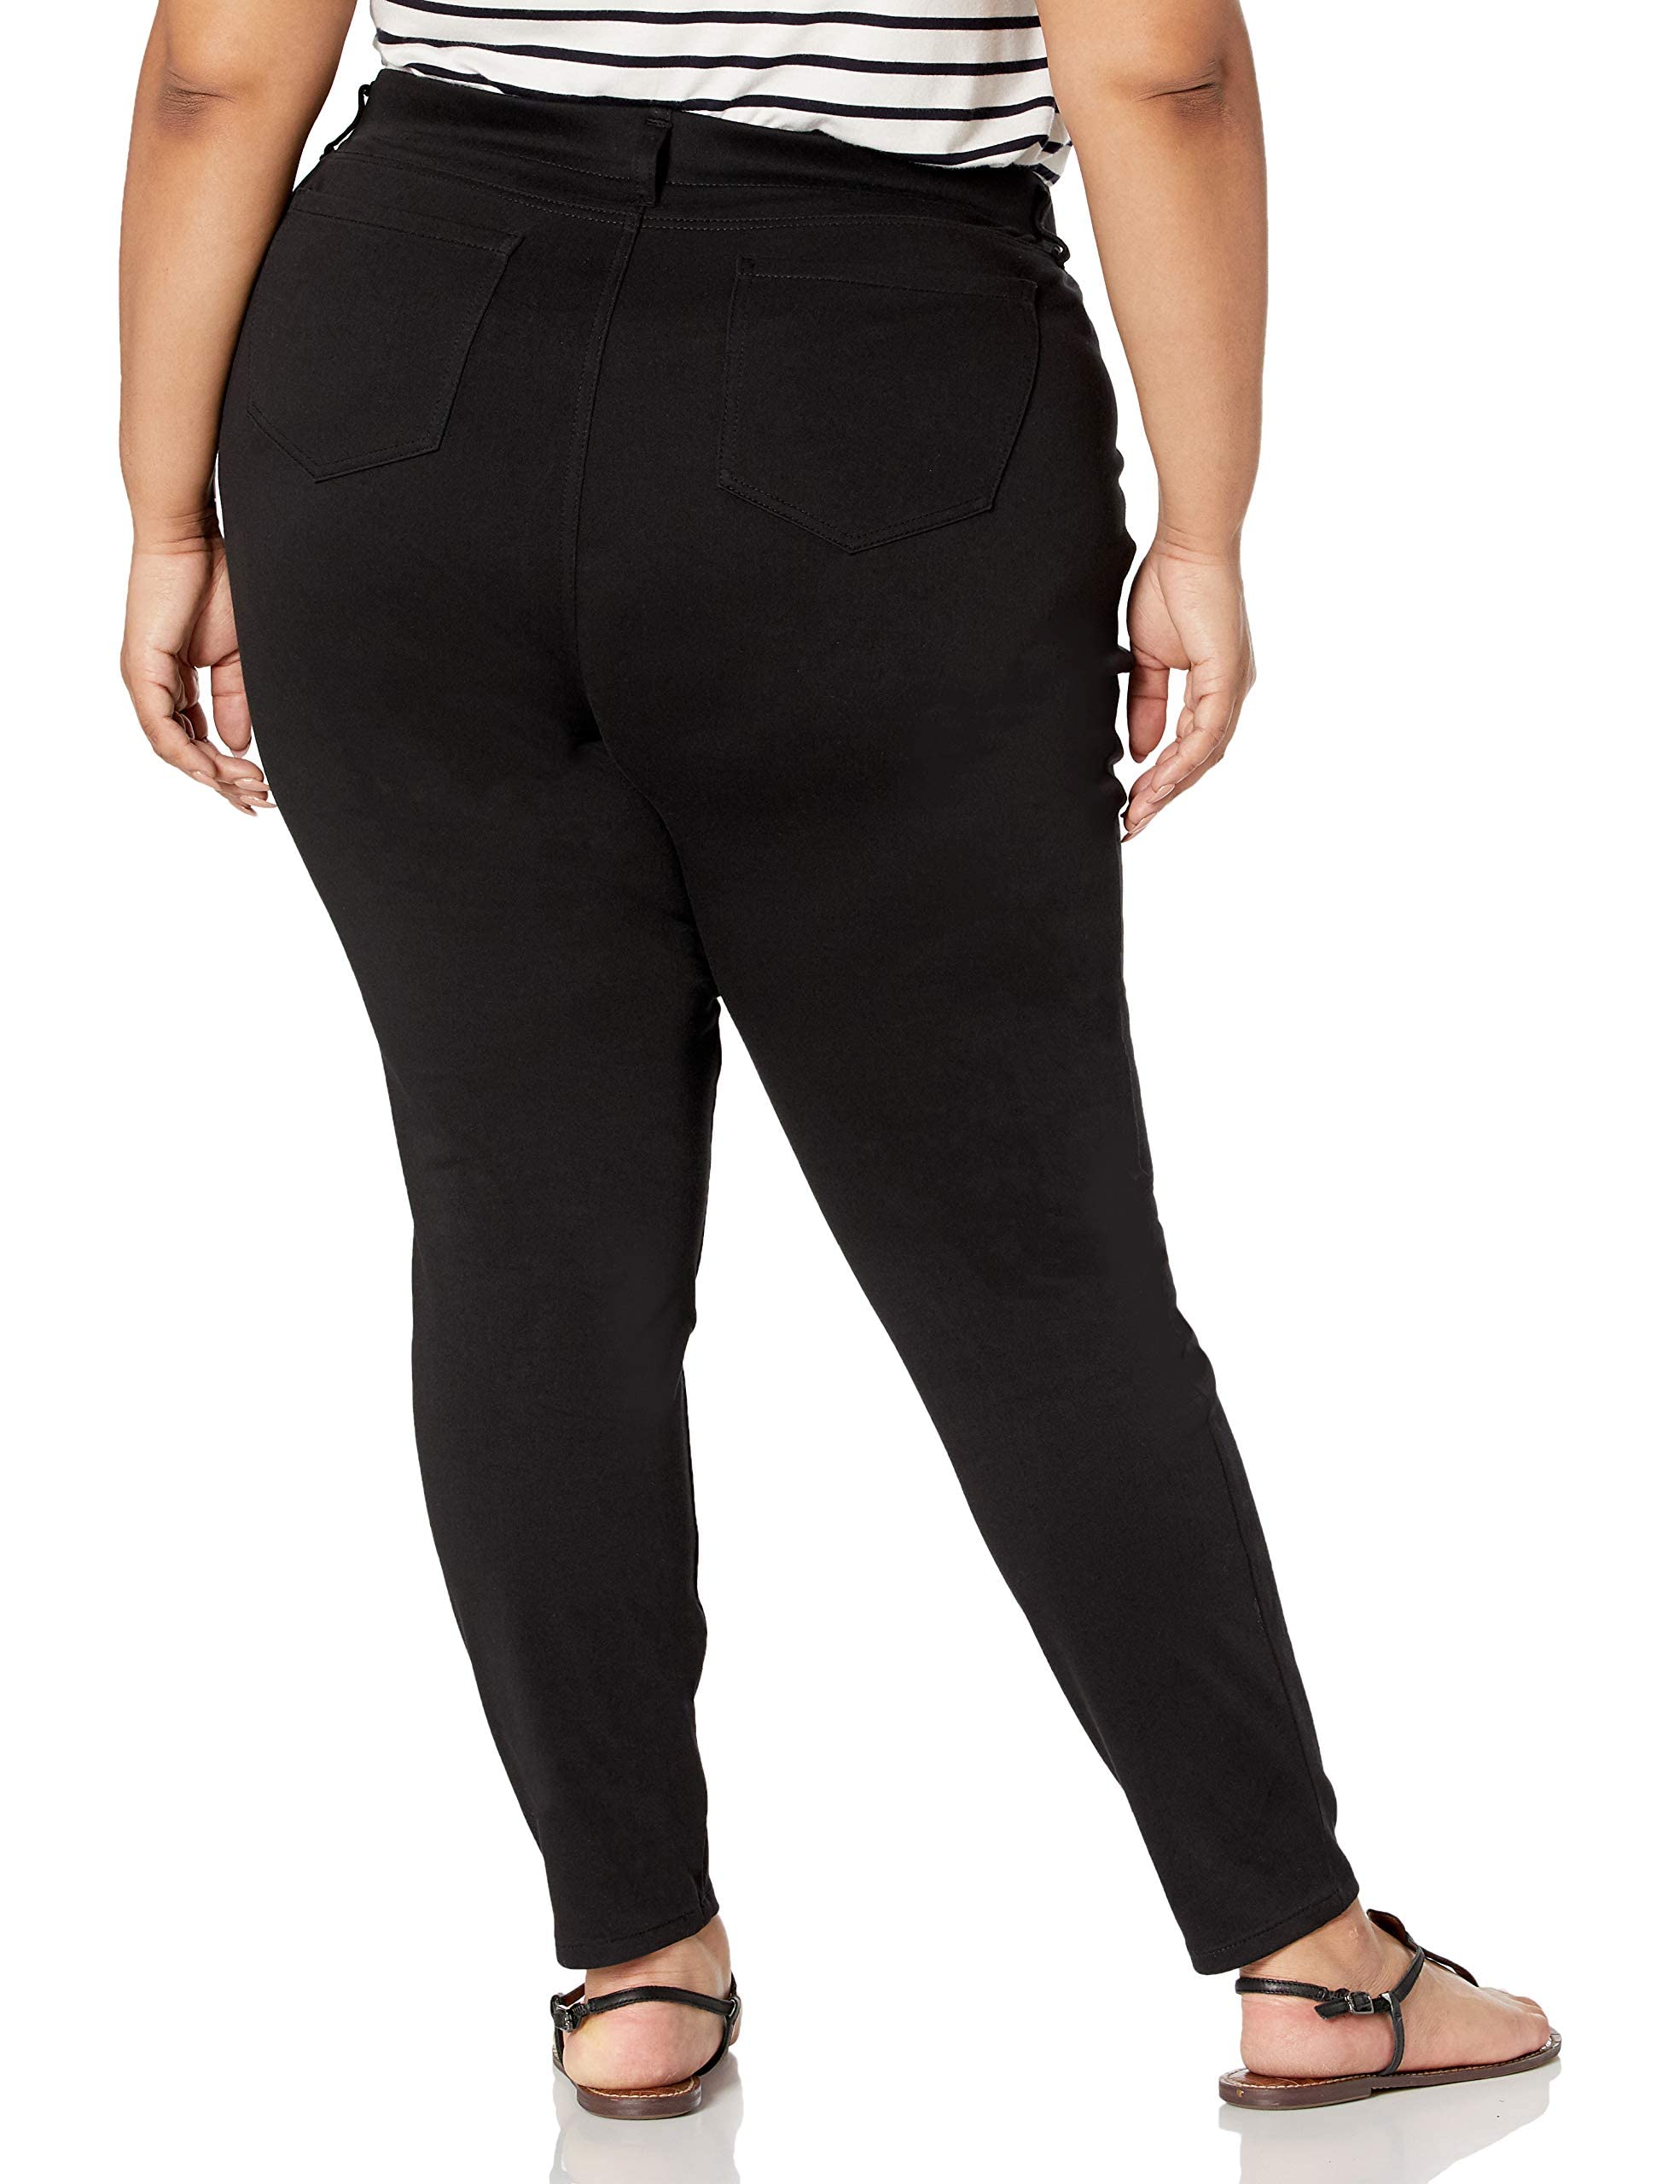 Amazon Essentials Women's Pull-On Knit Jegging (Available in Plus Size)